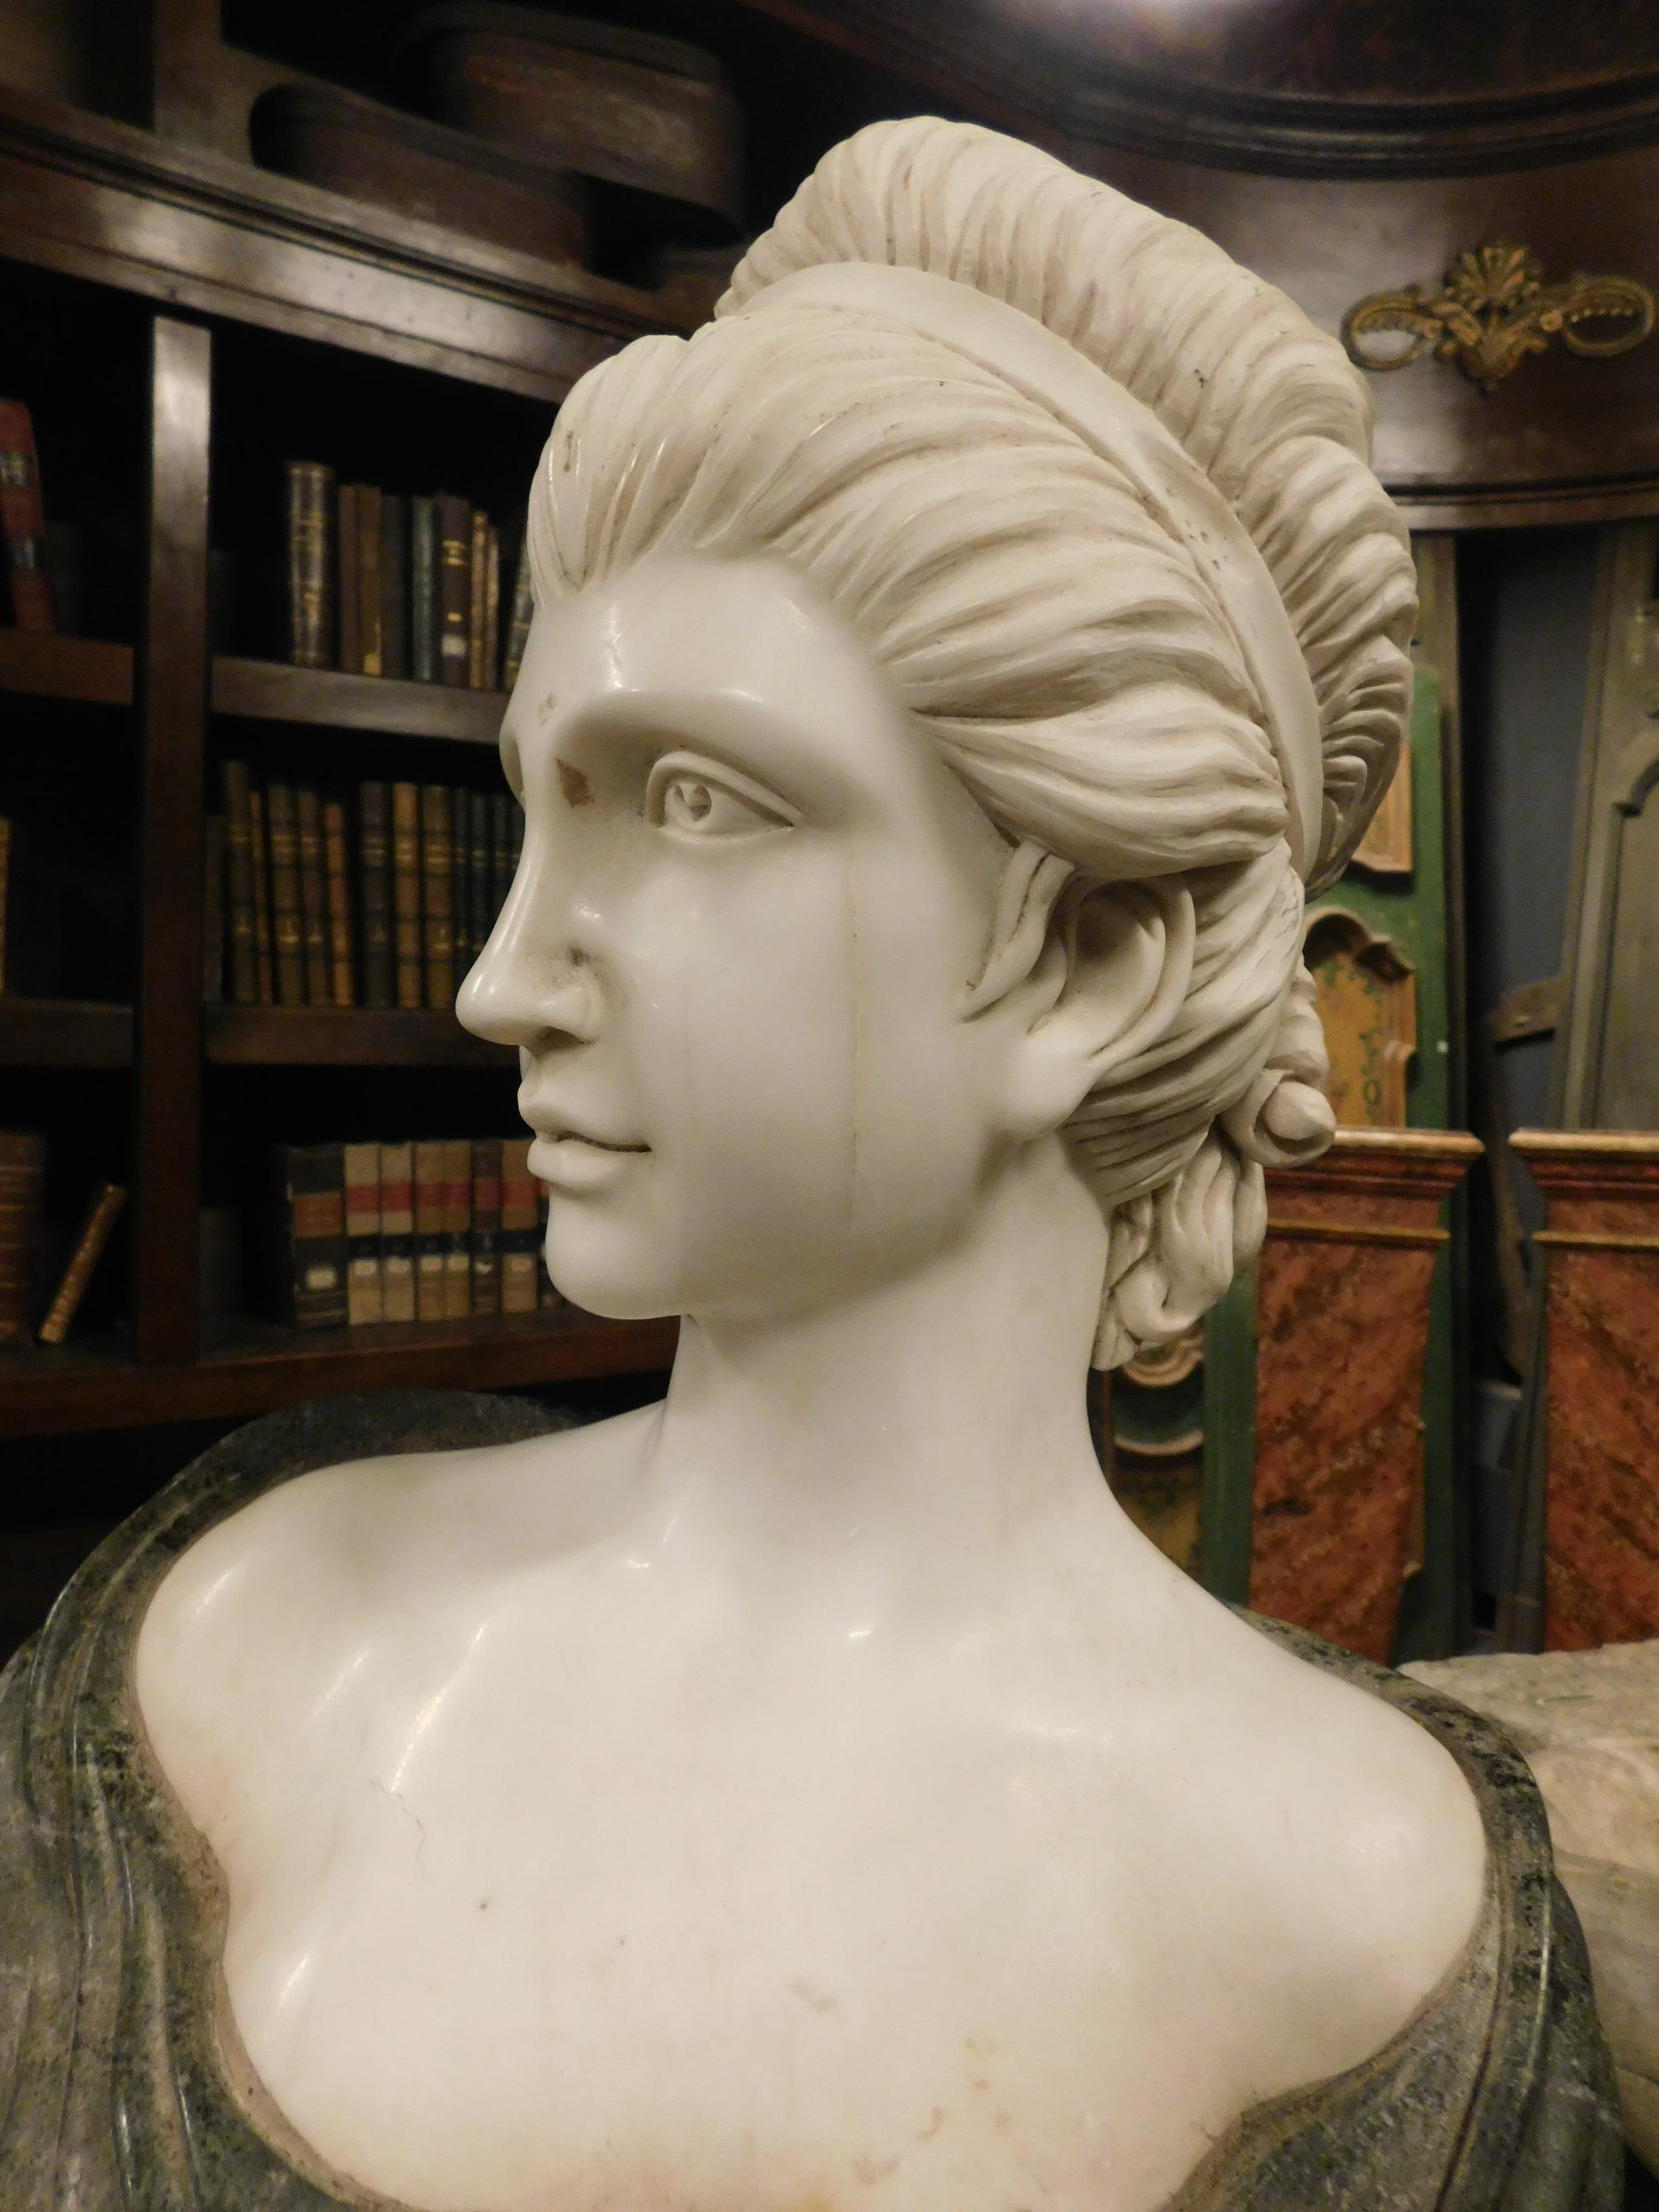 Hand-Carved Antique Bust of a Woman Carved in White and Green Marble, 19th Century Italy